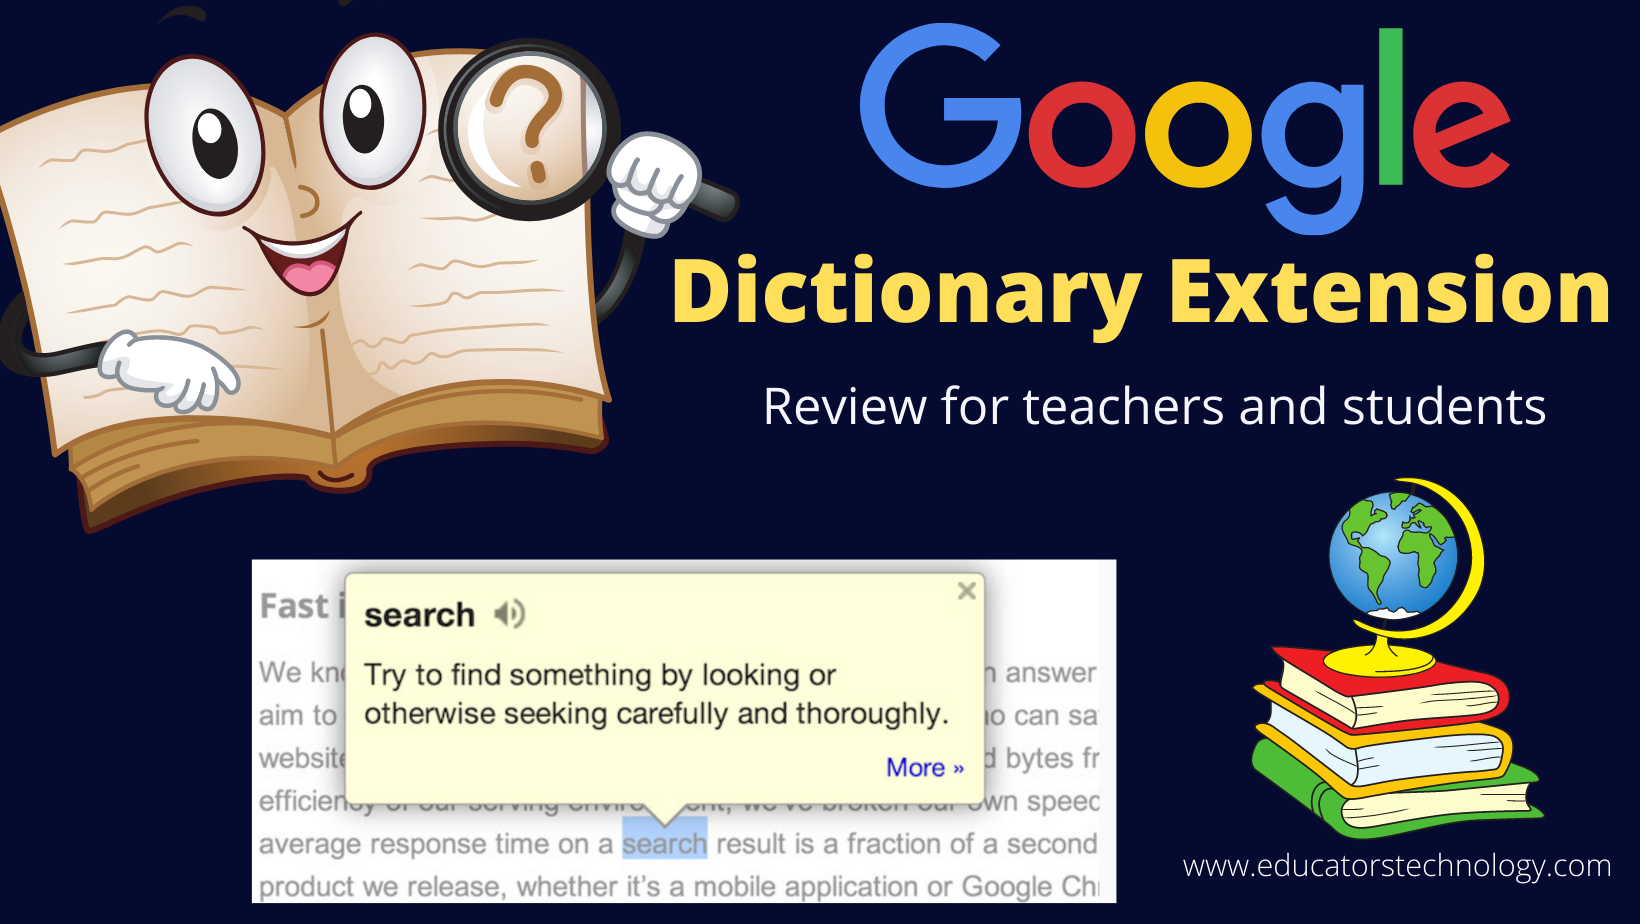 Google Dictionary extension